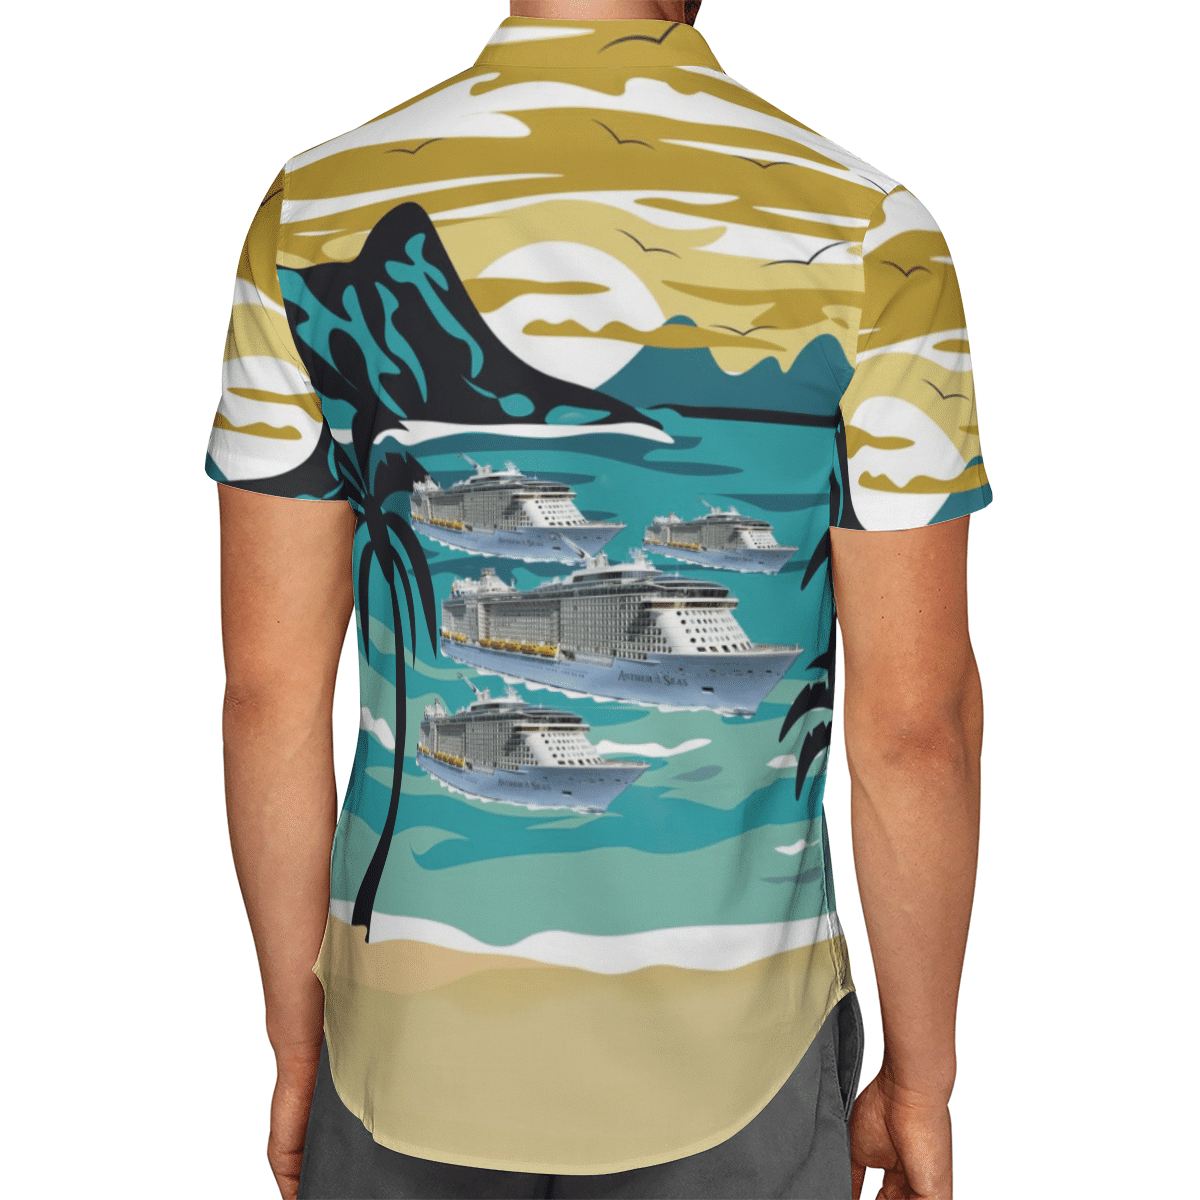 Going to the beach with a quality shirt 67